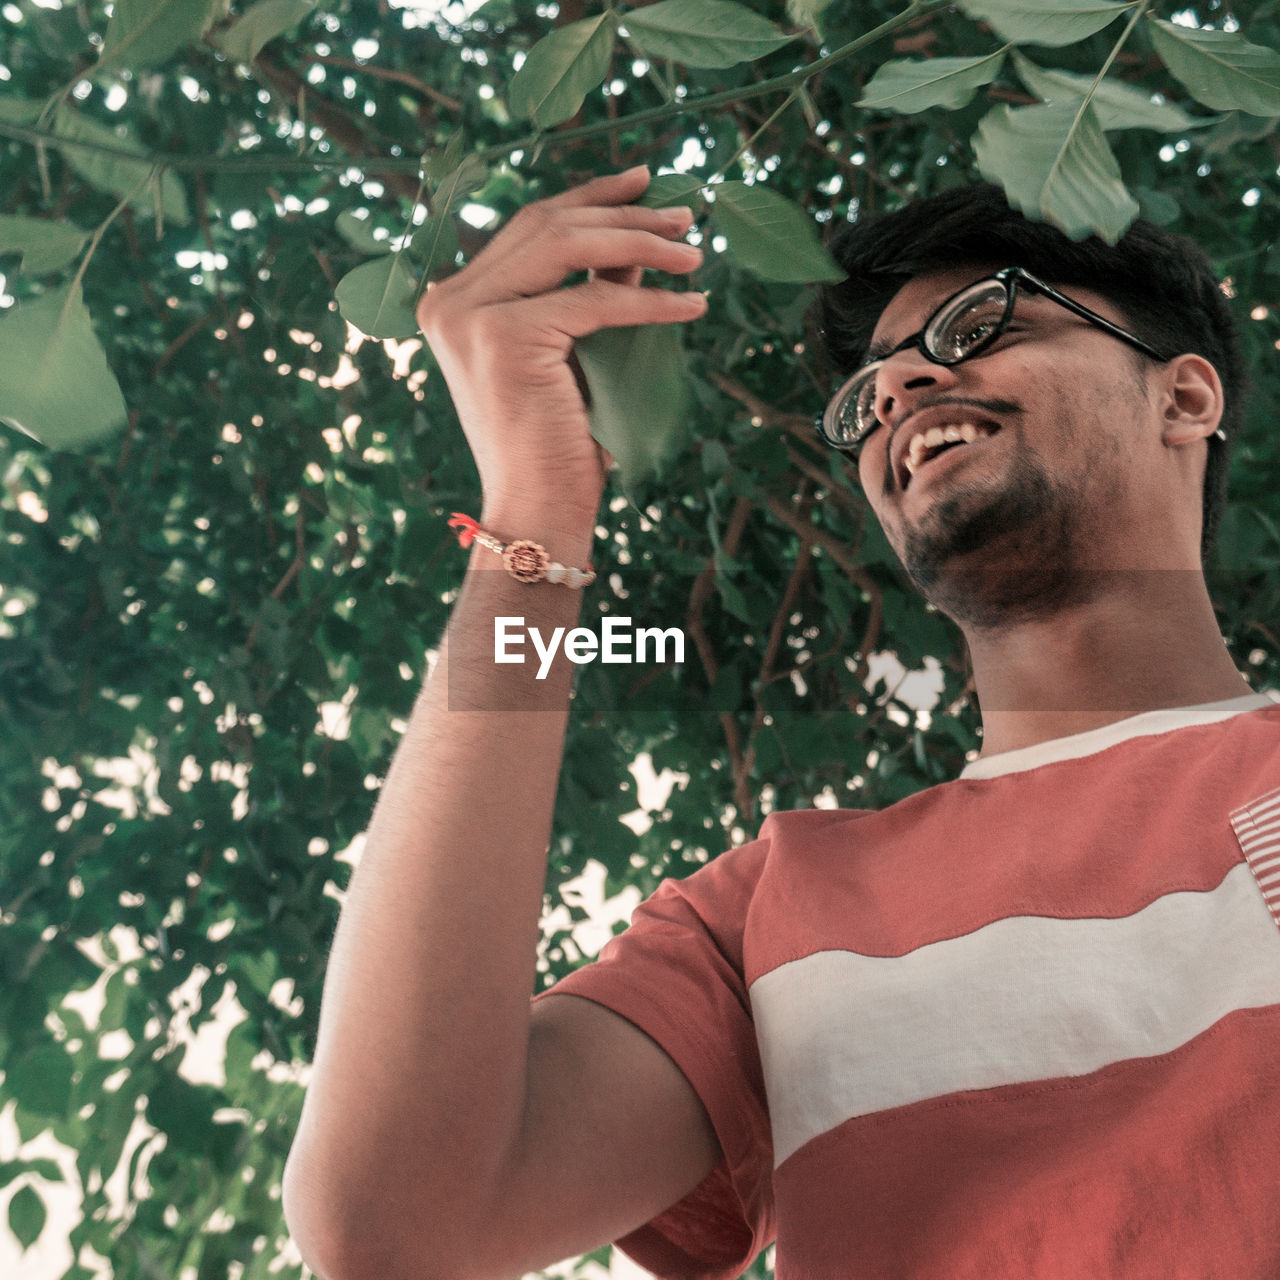 PORTRAIT OF YOUNG MAN HOLDING EYEGLASSES AGAINST PLANTS